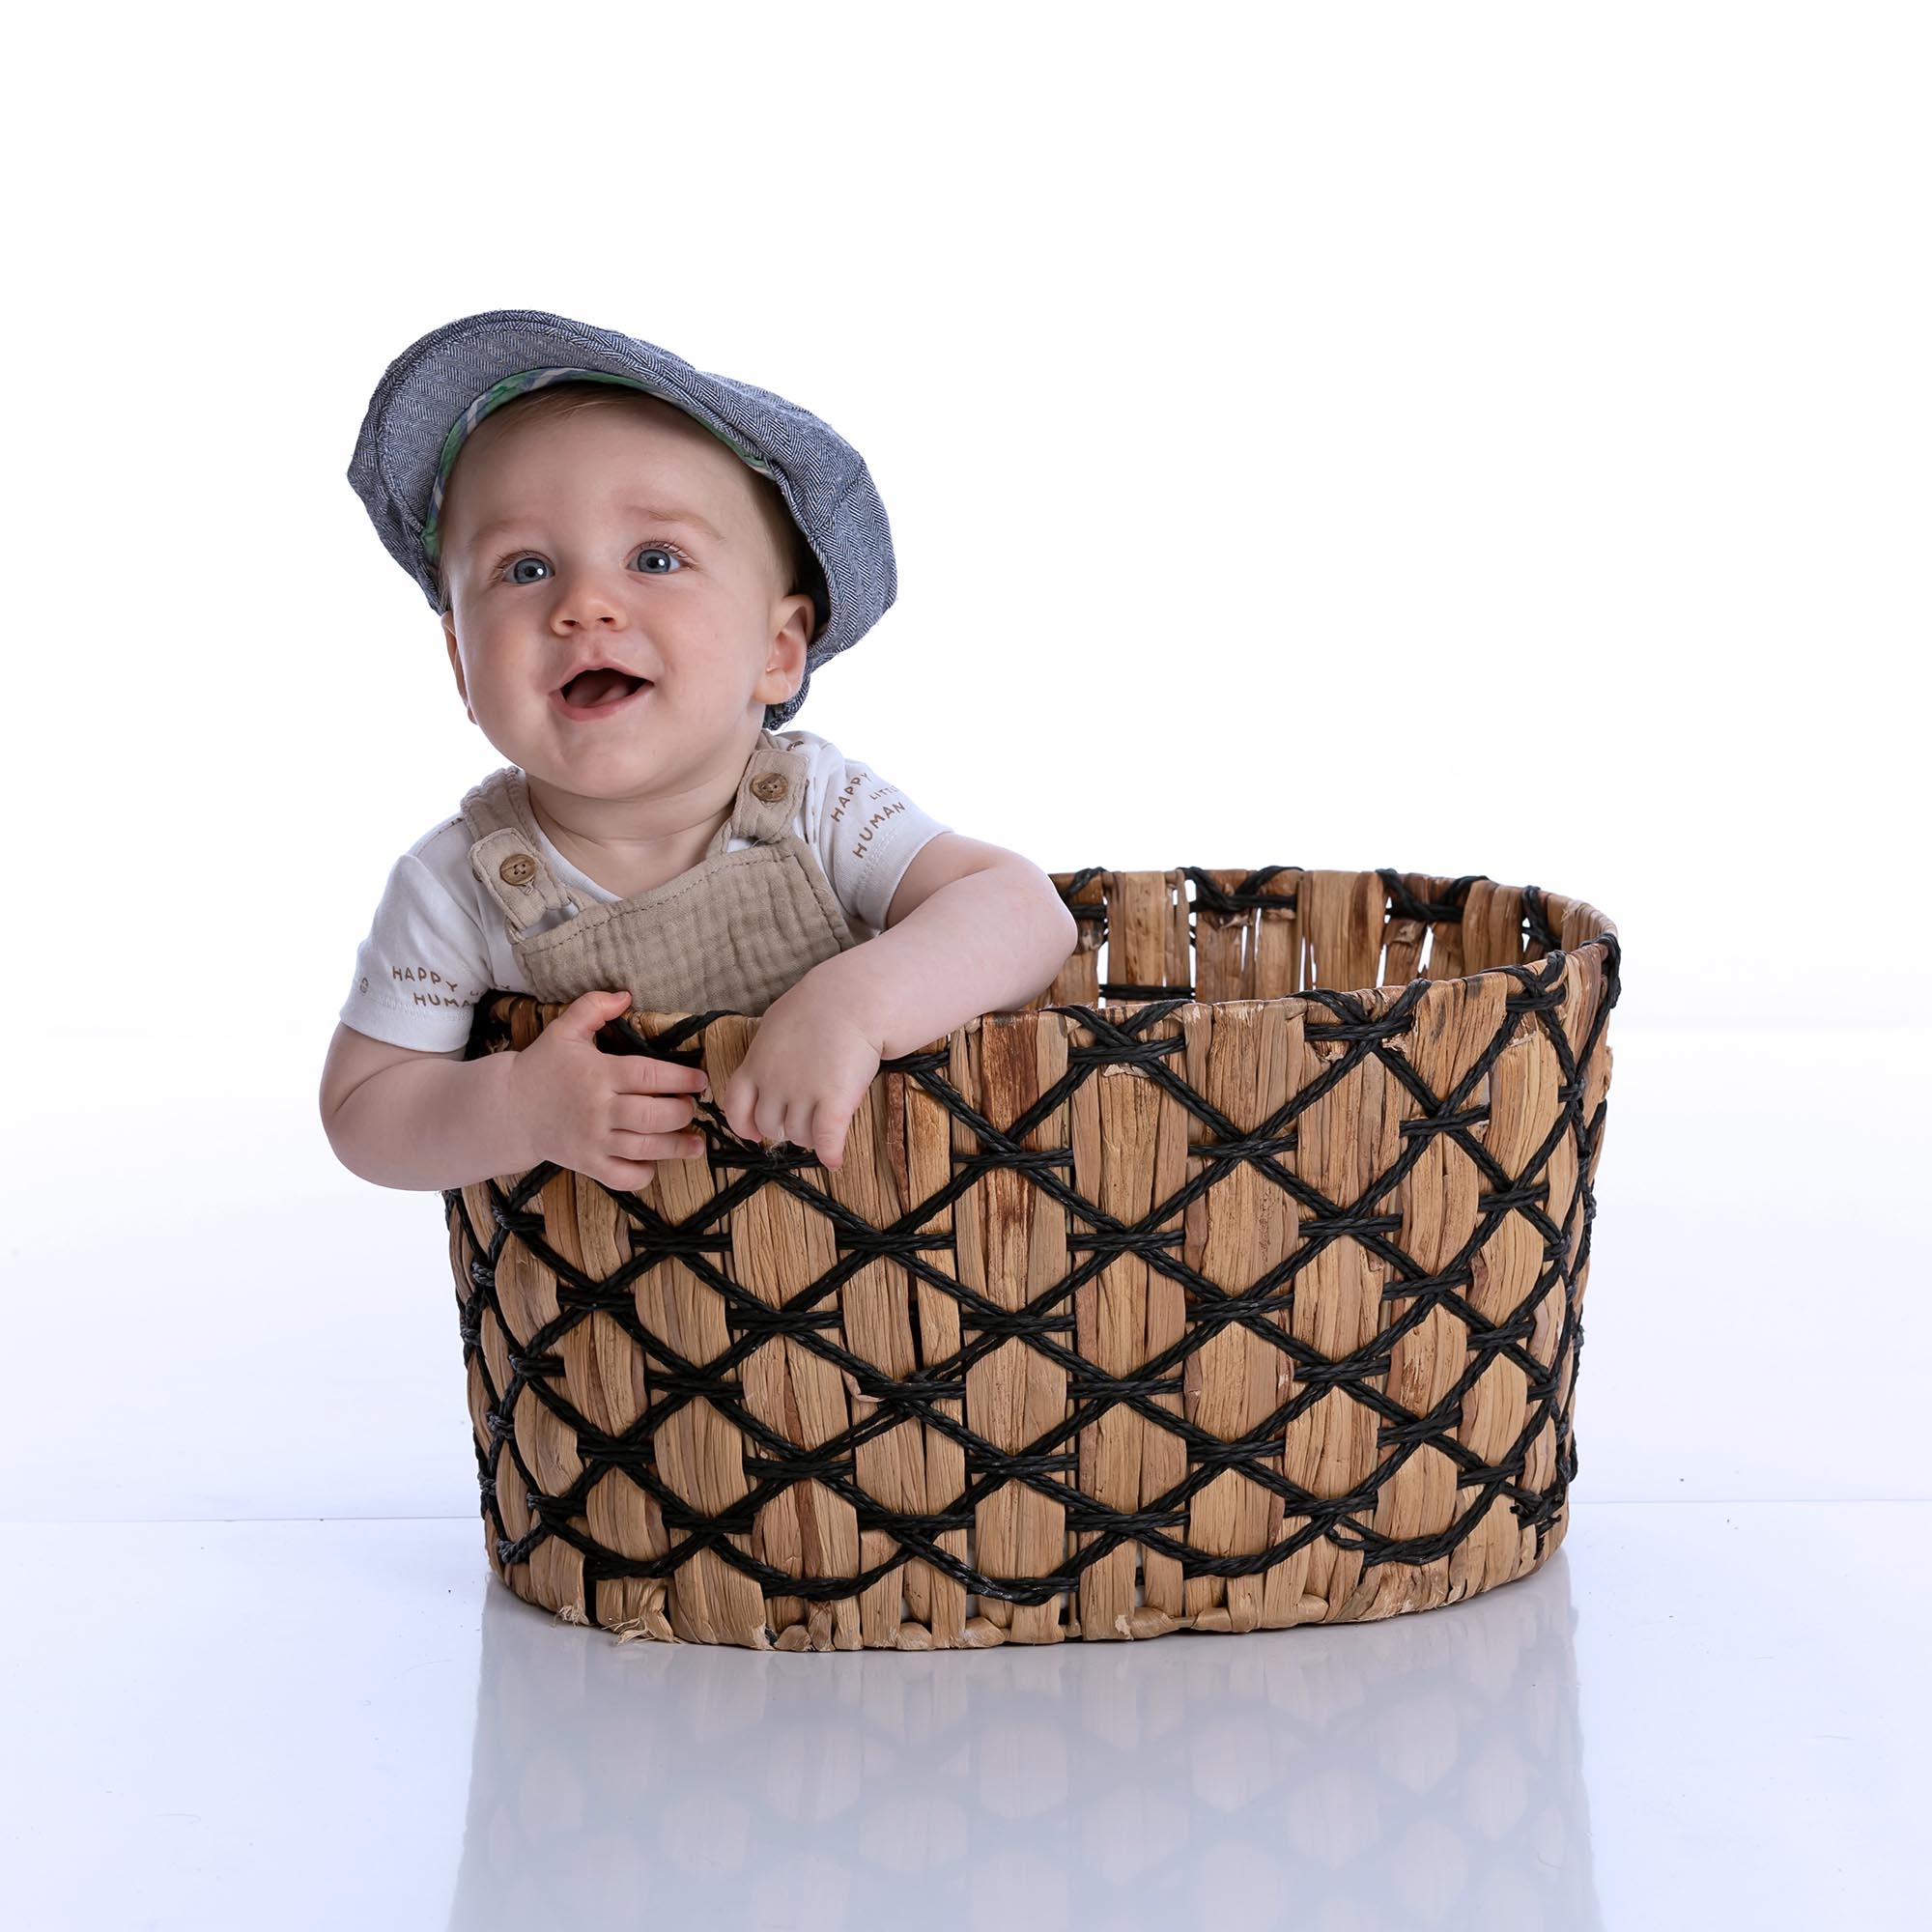 Six month old baby sat in a basket, with a flat cap.